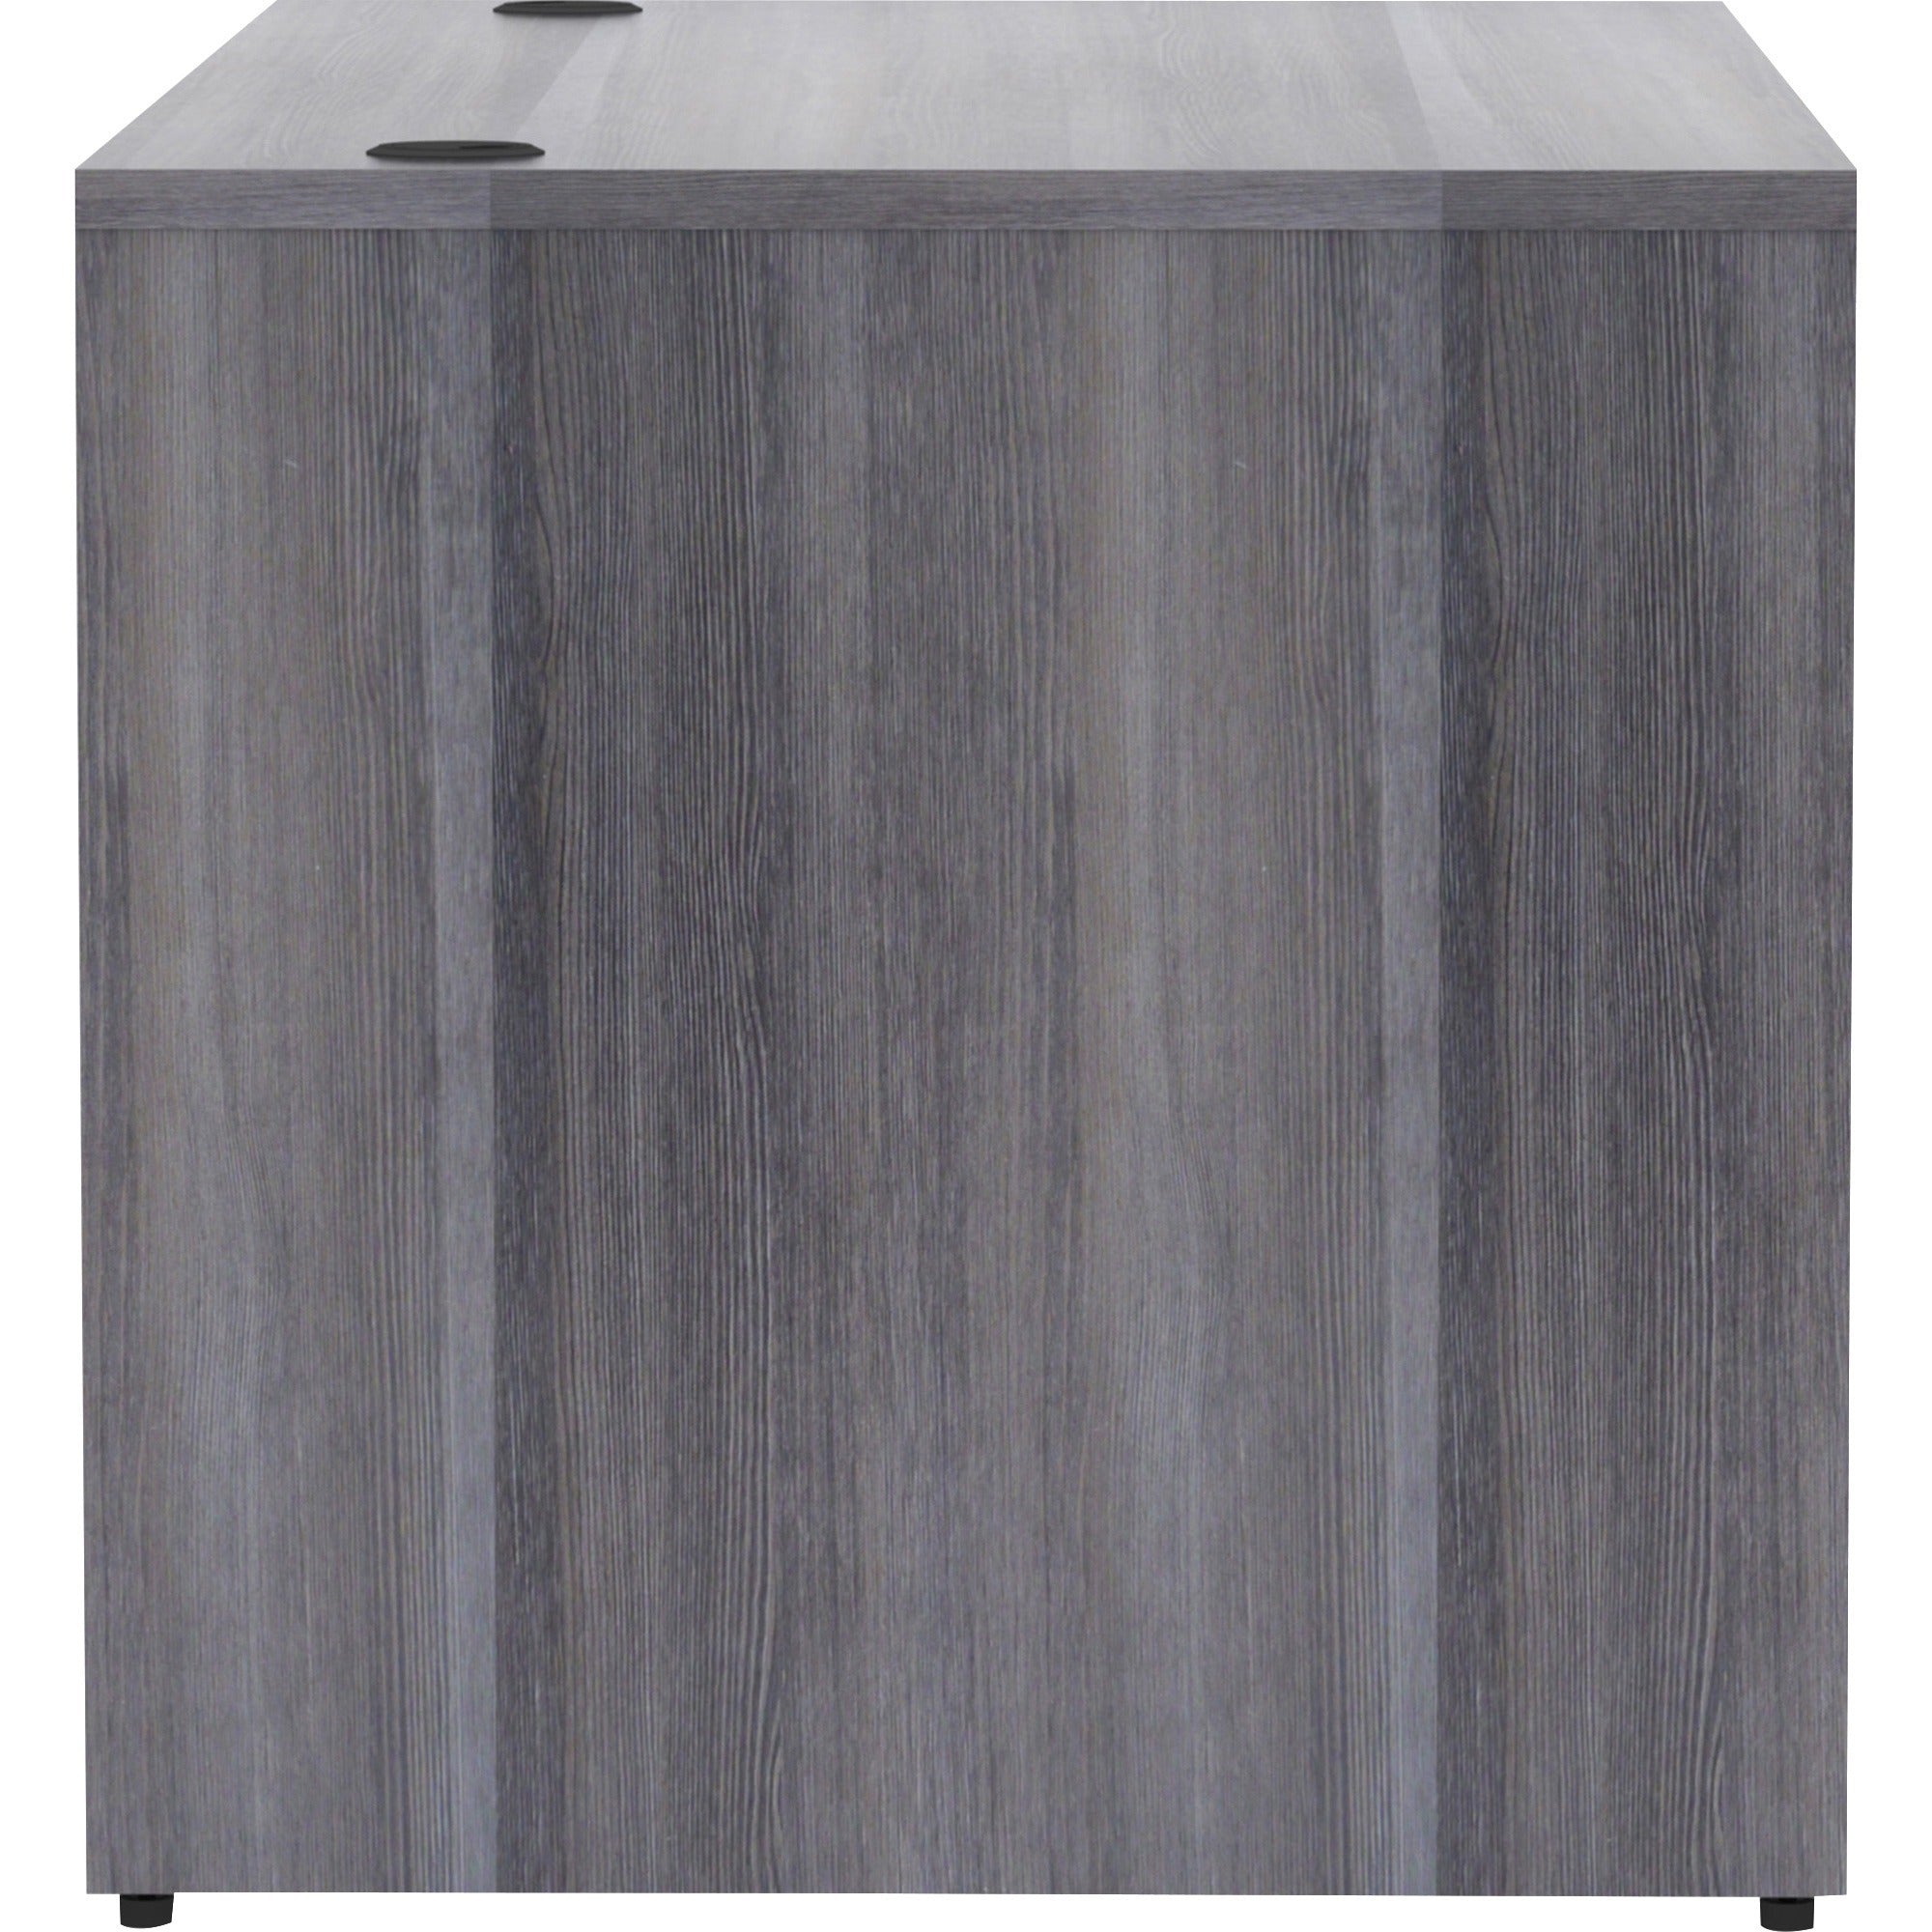 lorell-essentials-series-rectangular-desk-shell-60-x-30295--1-top-laminate-weathered-charcoal-table-top-grommet_llr69547 - 3